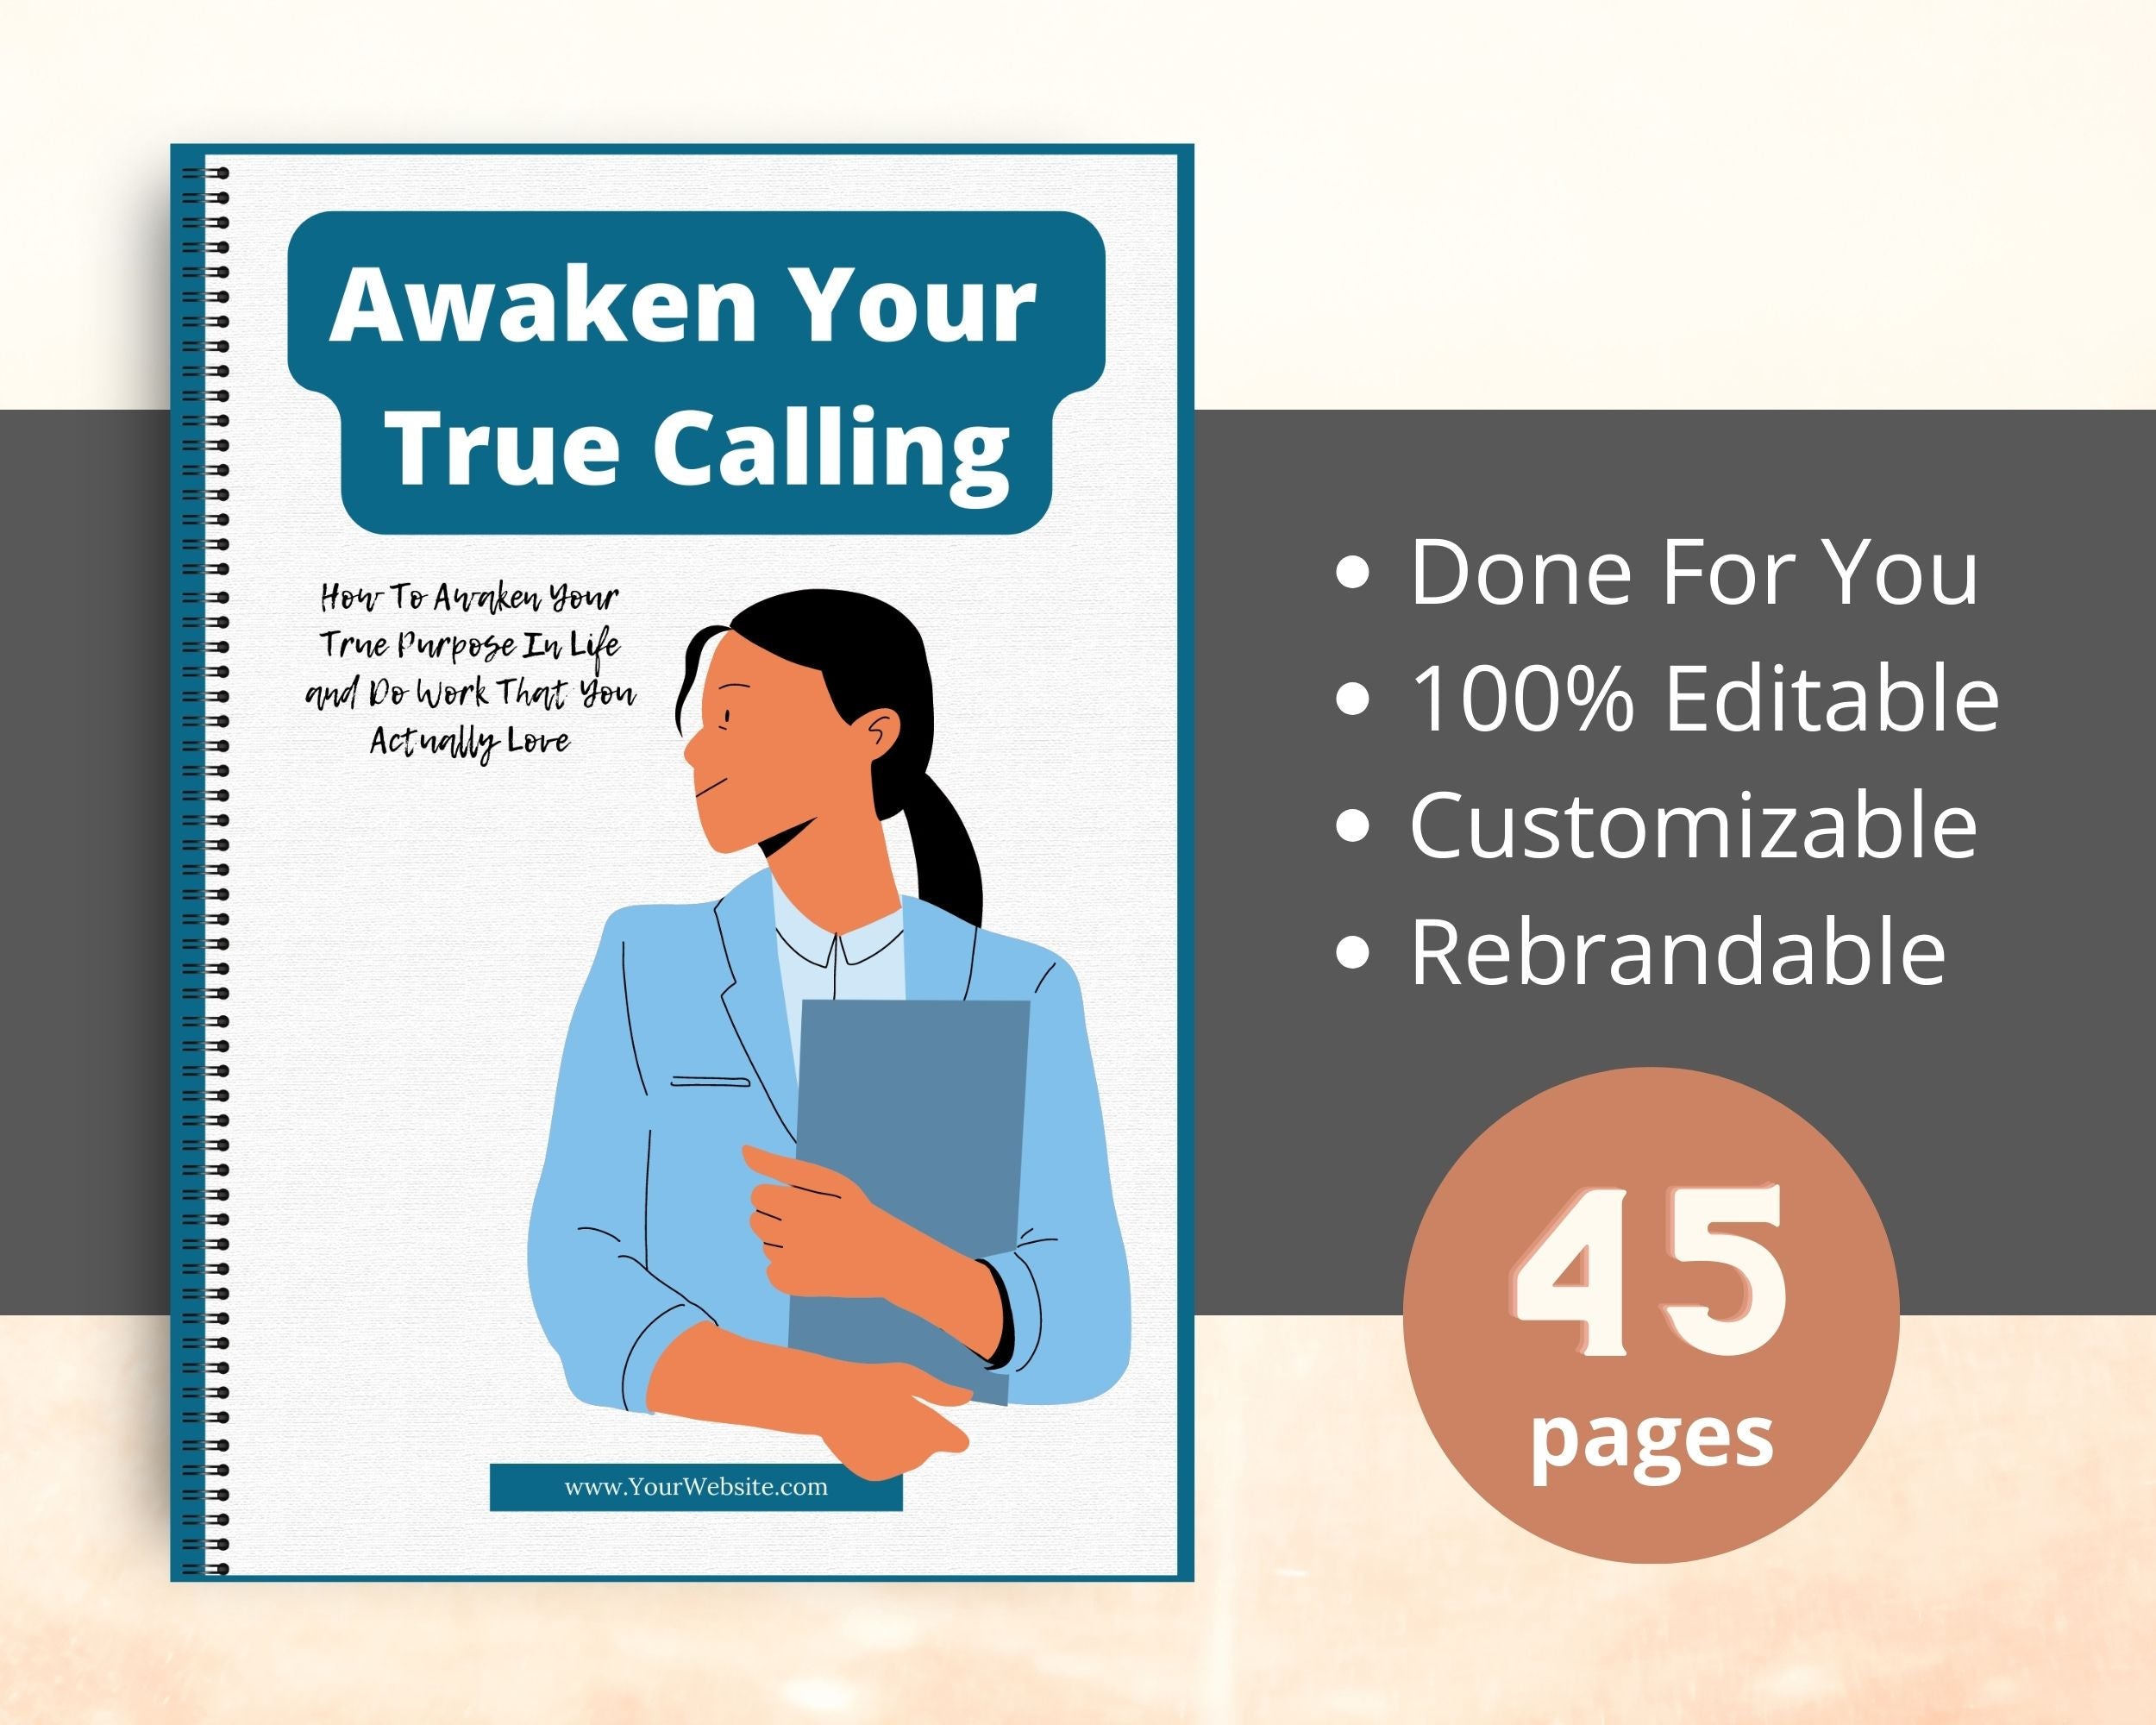 Editable Awaken Your True Calling Ebook | Done-for-You Ebook in Canva | Rebrandable and Resizable Canva Template